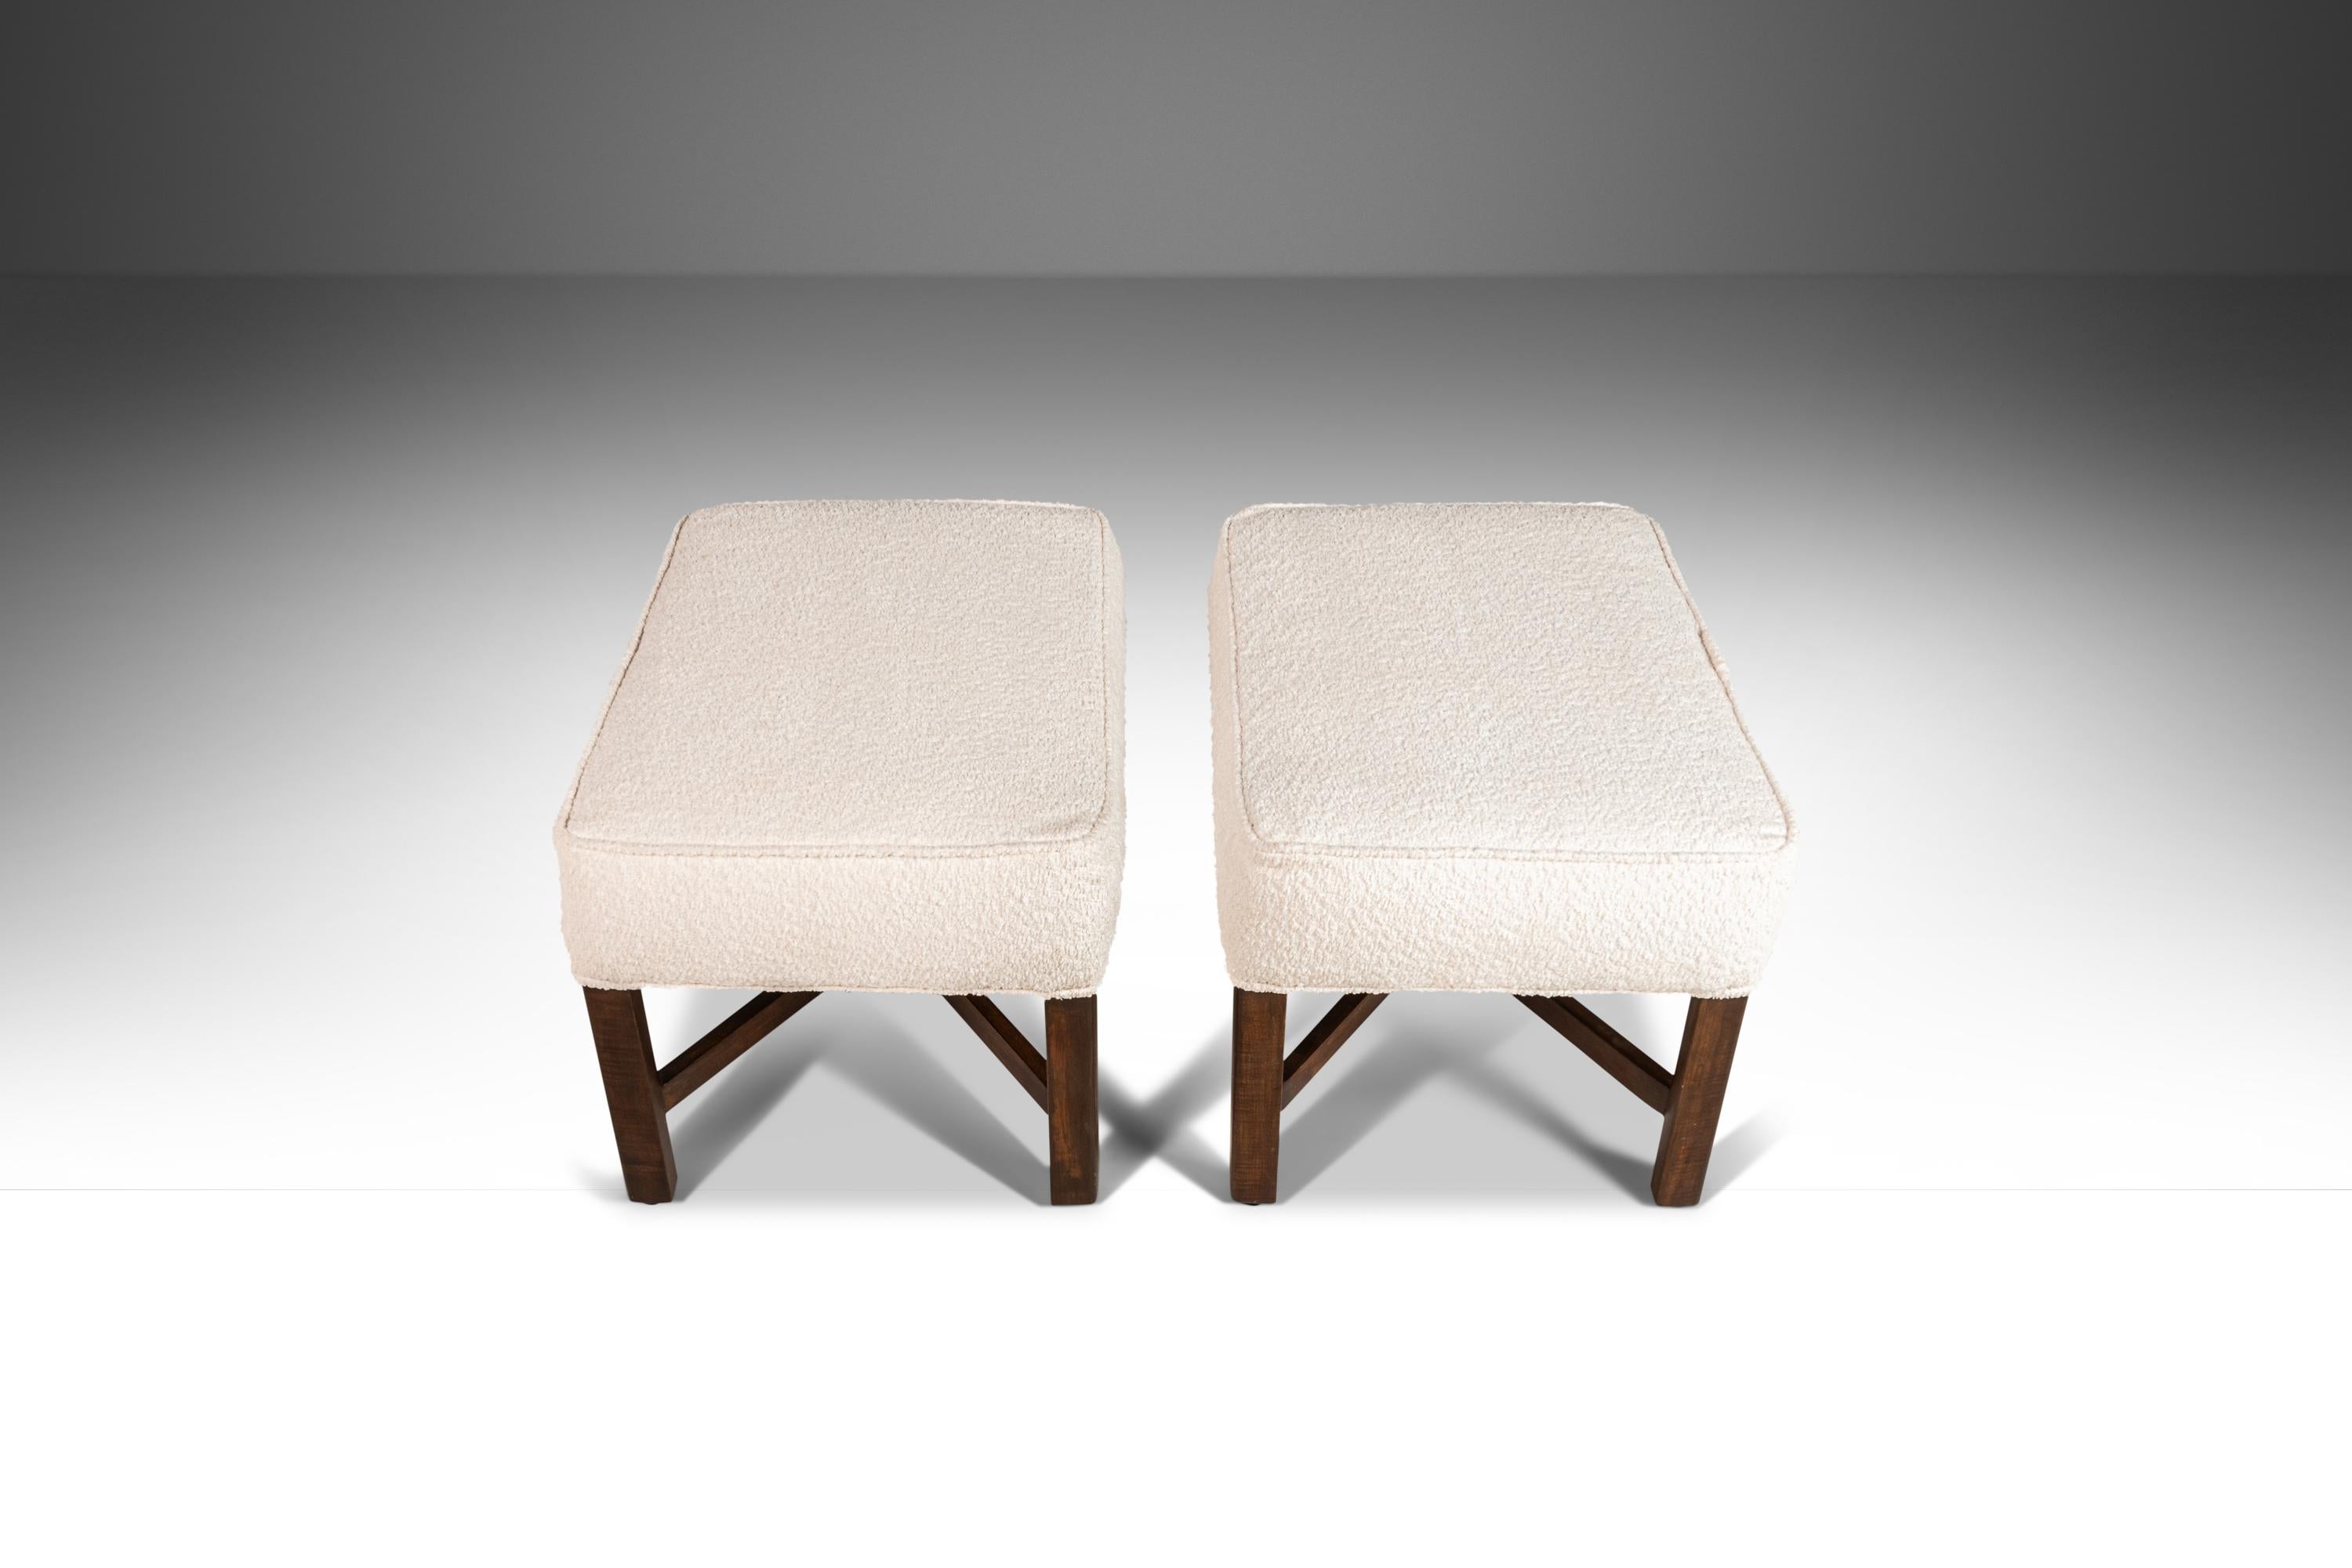 American Set of Two '2' Ottomans Footstools After Edward Wormley for Dunbar, USA, 1960s